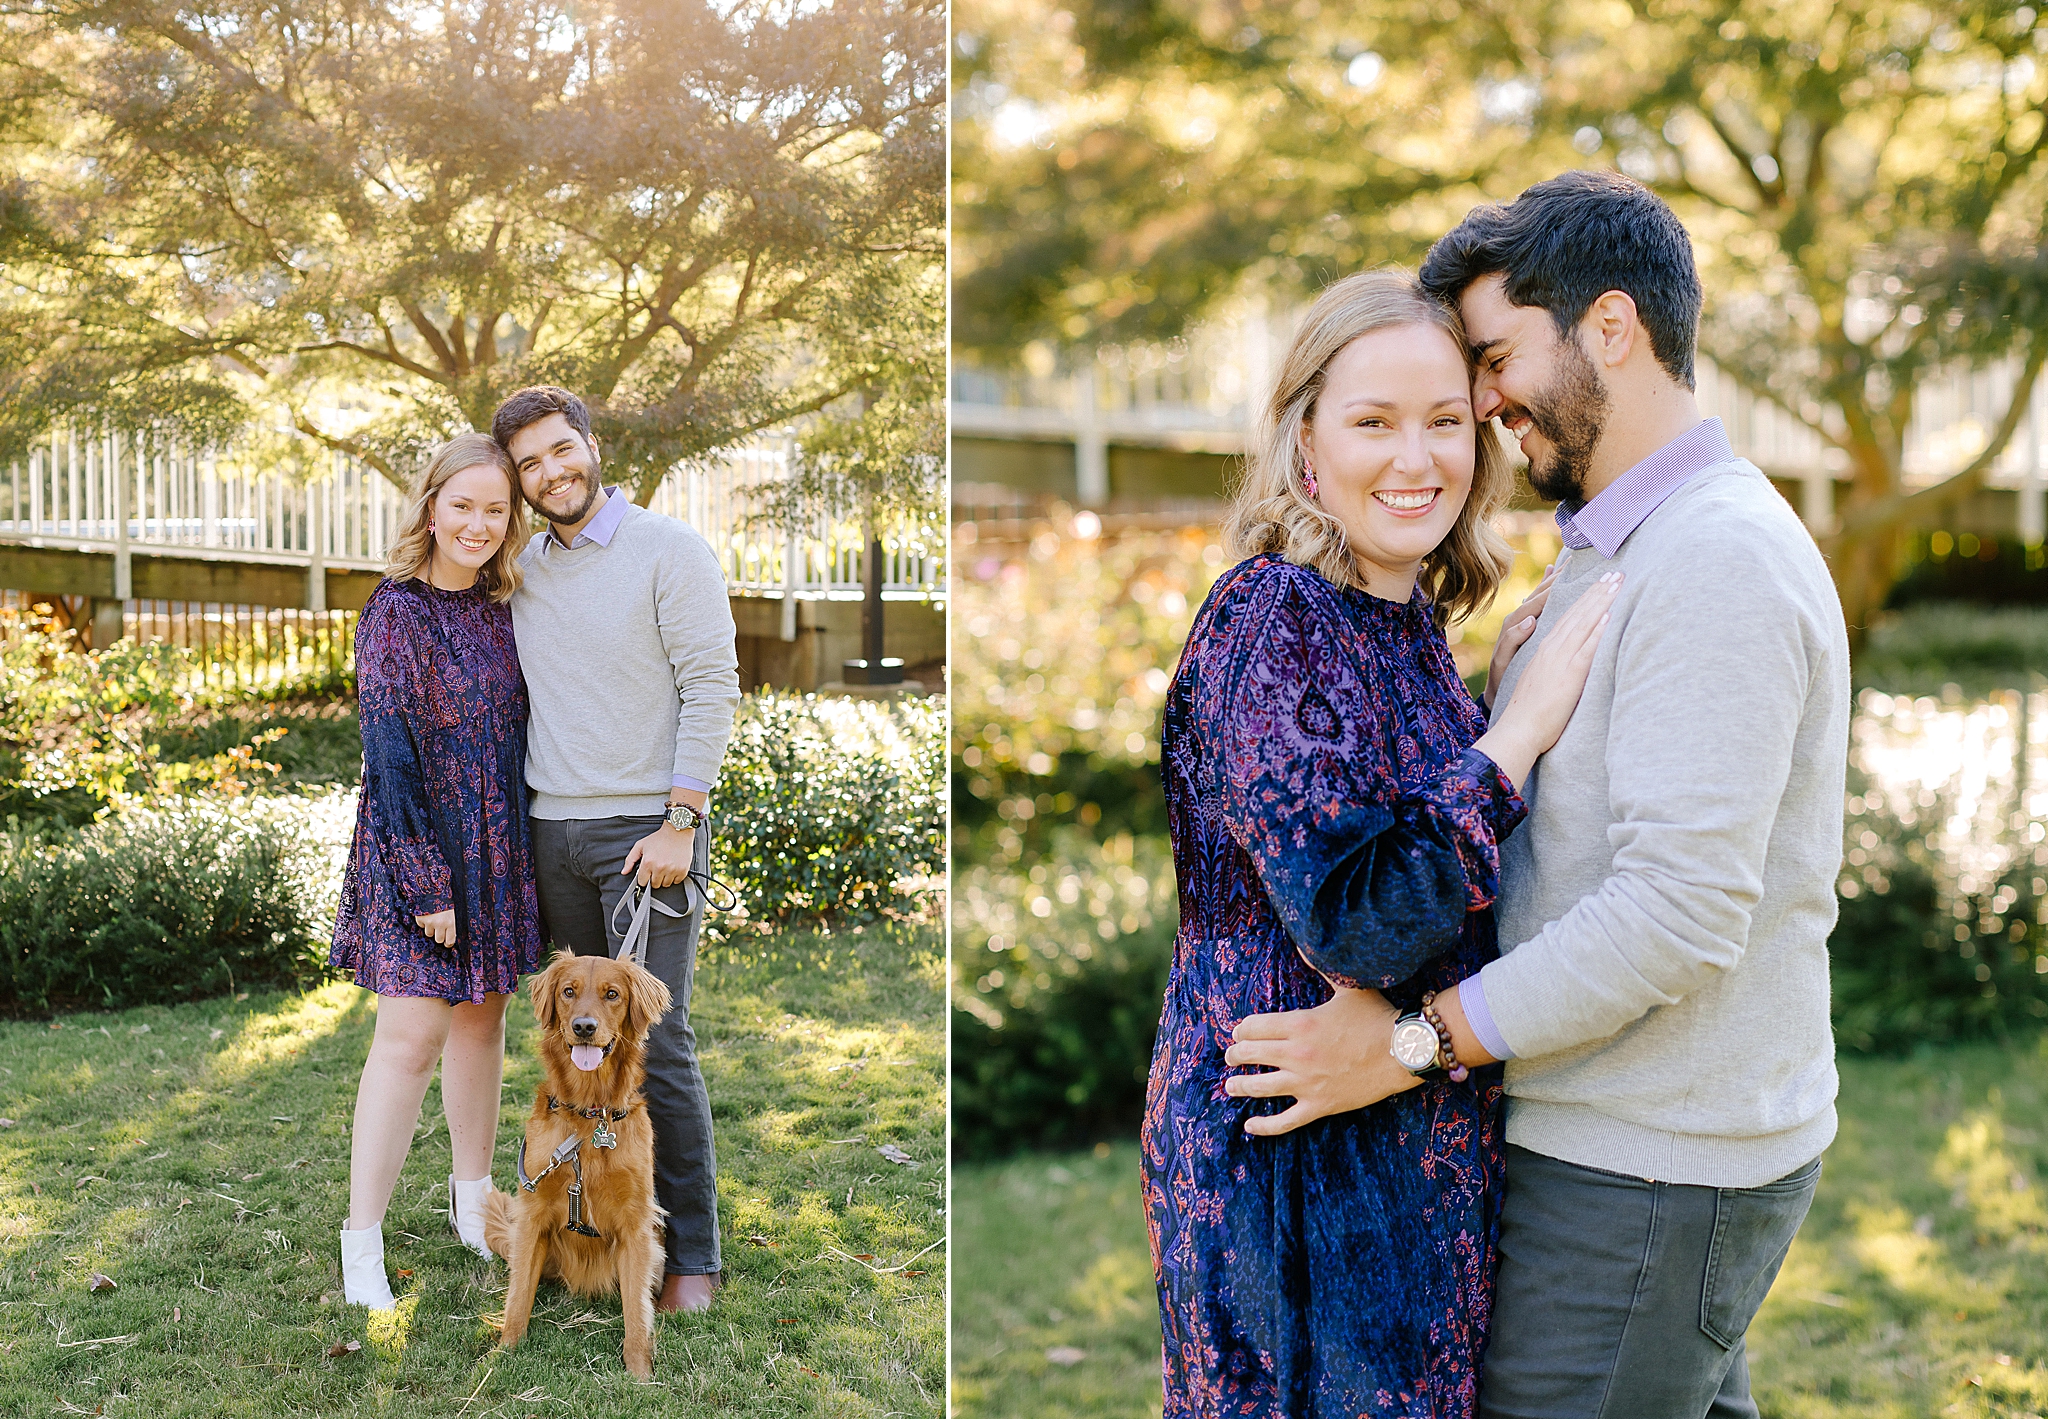 Pullen Park engagement portraits with couple and their dog